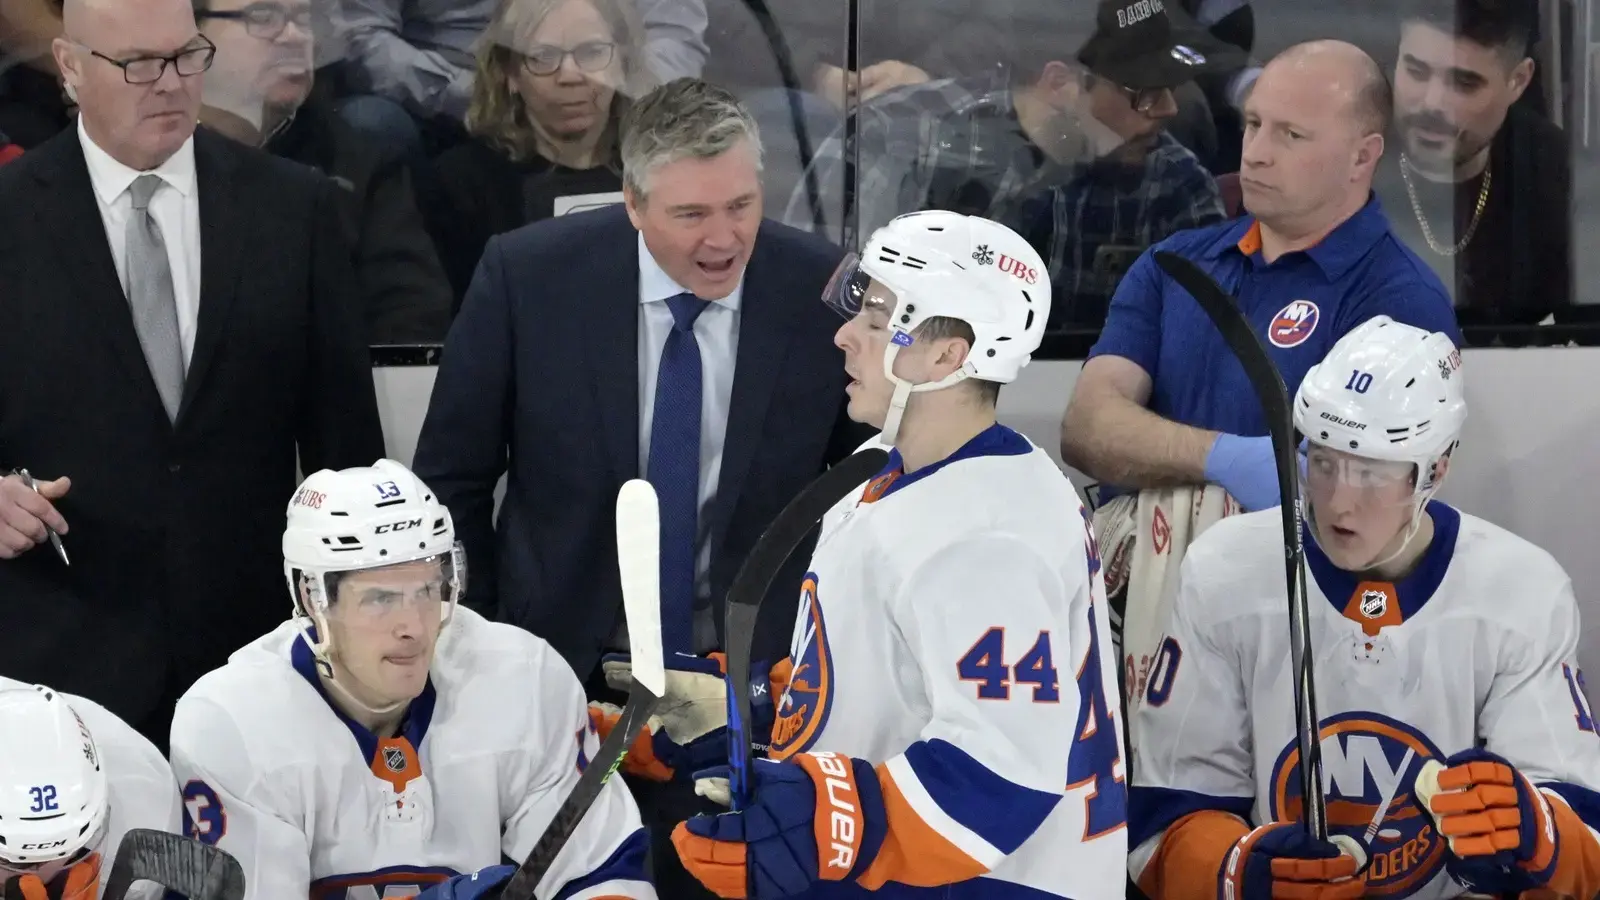 New York Islanders head coach Patrick Roy talks to forward Jean-Gabriel Pageau during the first period of the game against the Montreal Canadiens at the Bell Centre. / Eric Bolte-USA TODAY Sports